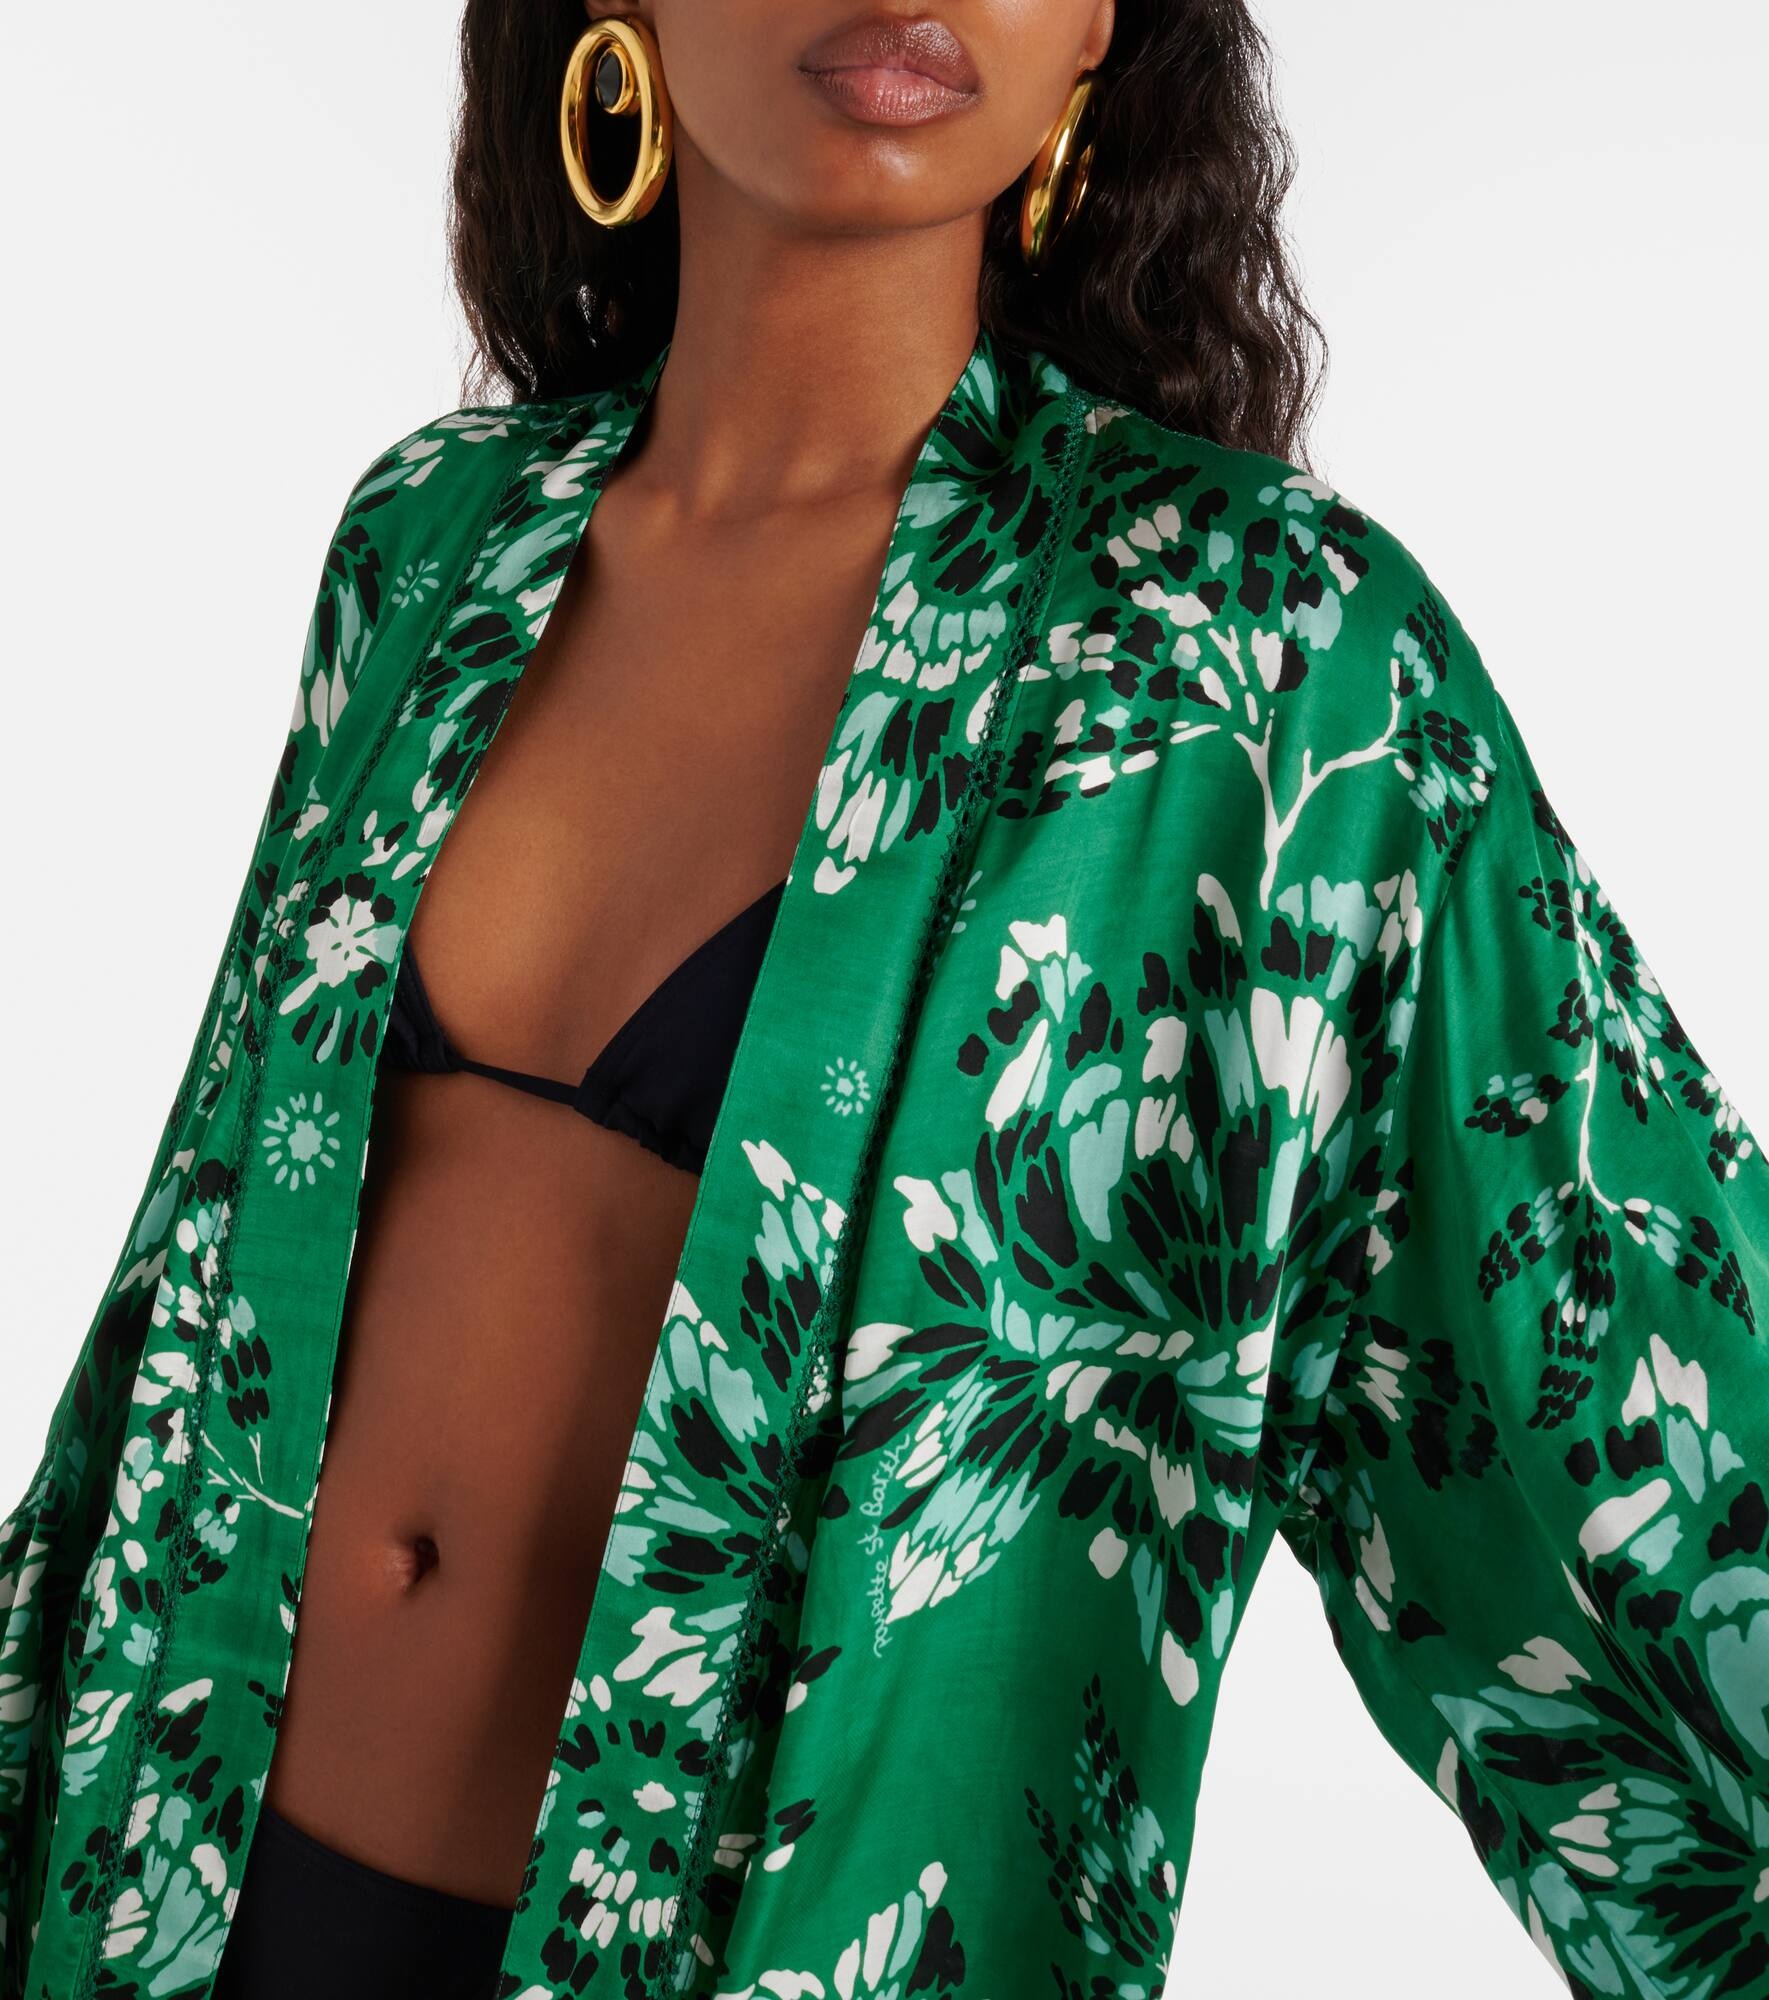 Erica floral beach cover-up - 4